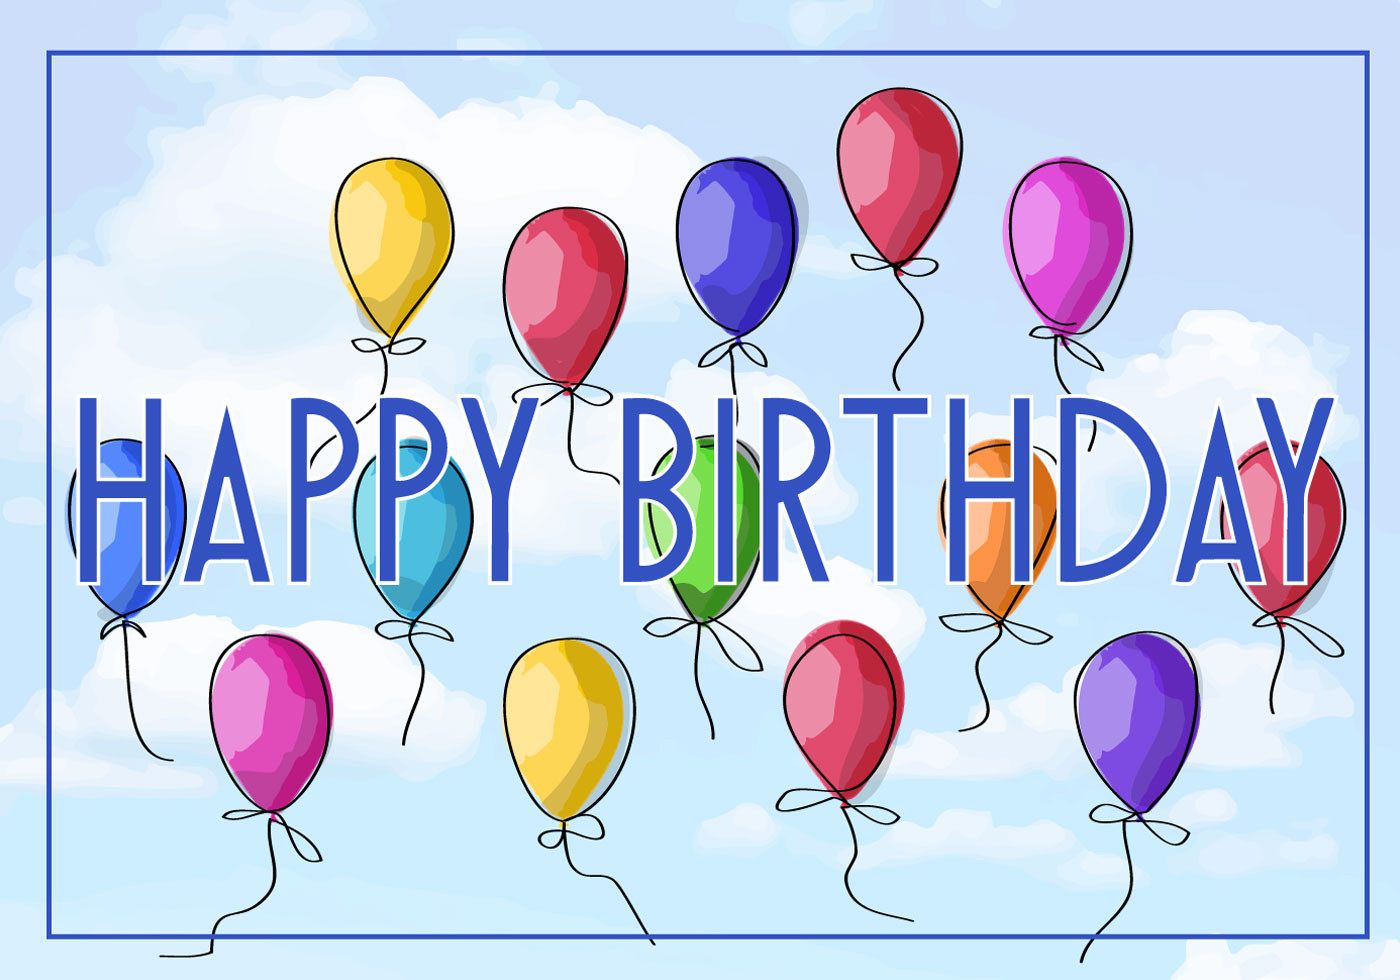 Free Birthday Cards Download
 Free Vector Illustration of a Happy Birthday Greeting Card